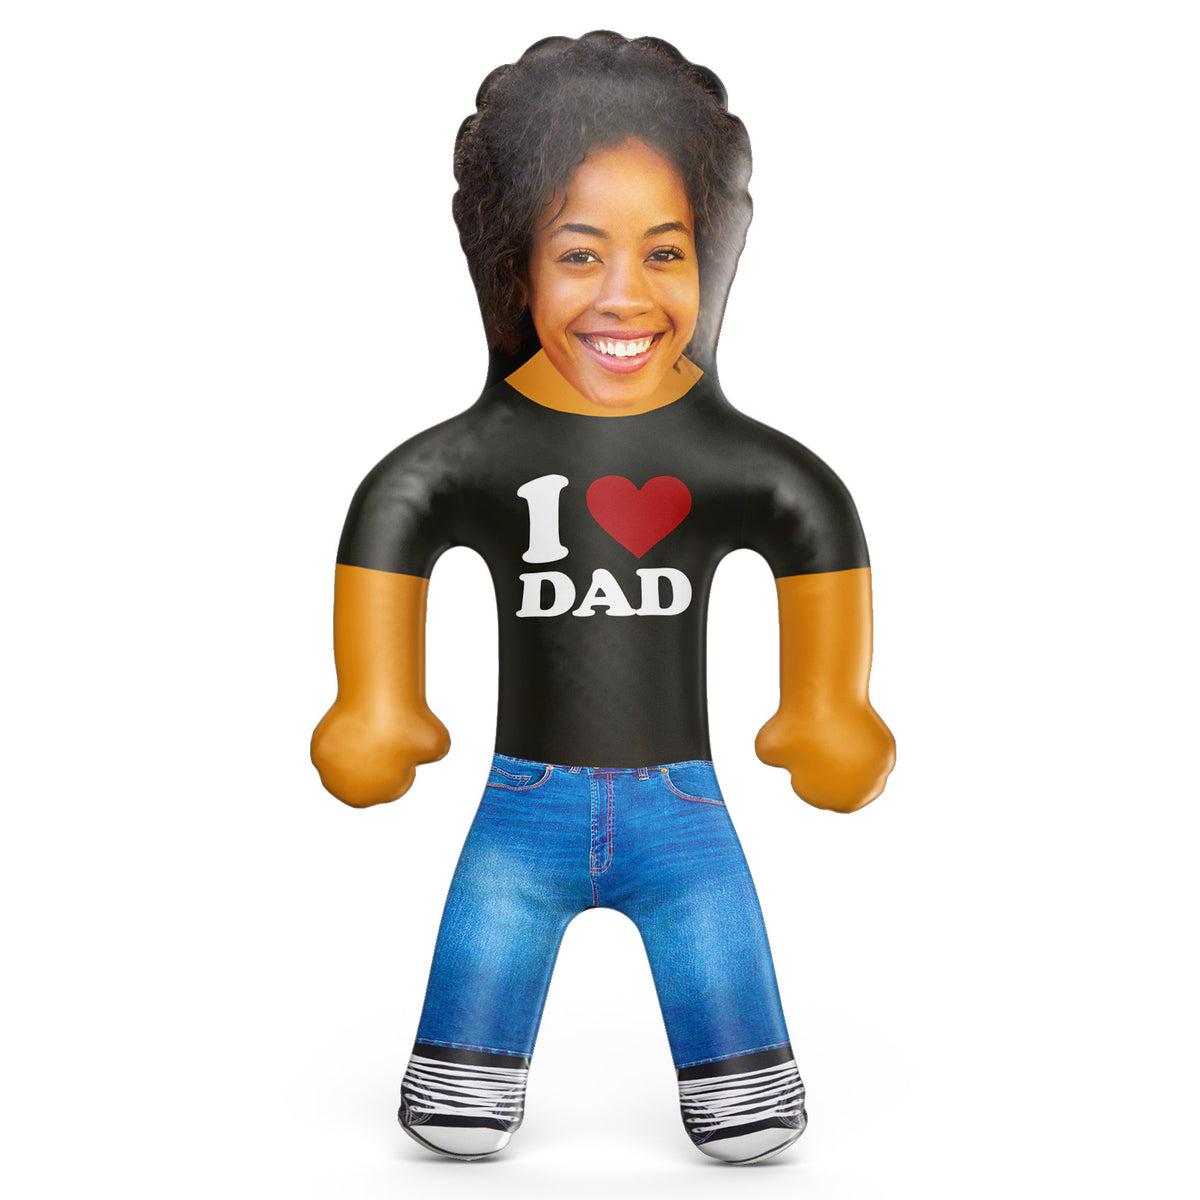 I Heart Dad Inflatable Doll - I Heart Dad Blow Up Doll